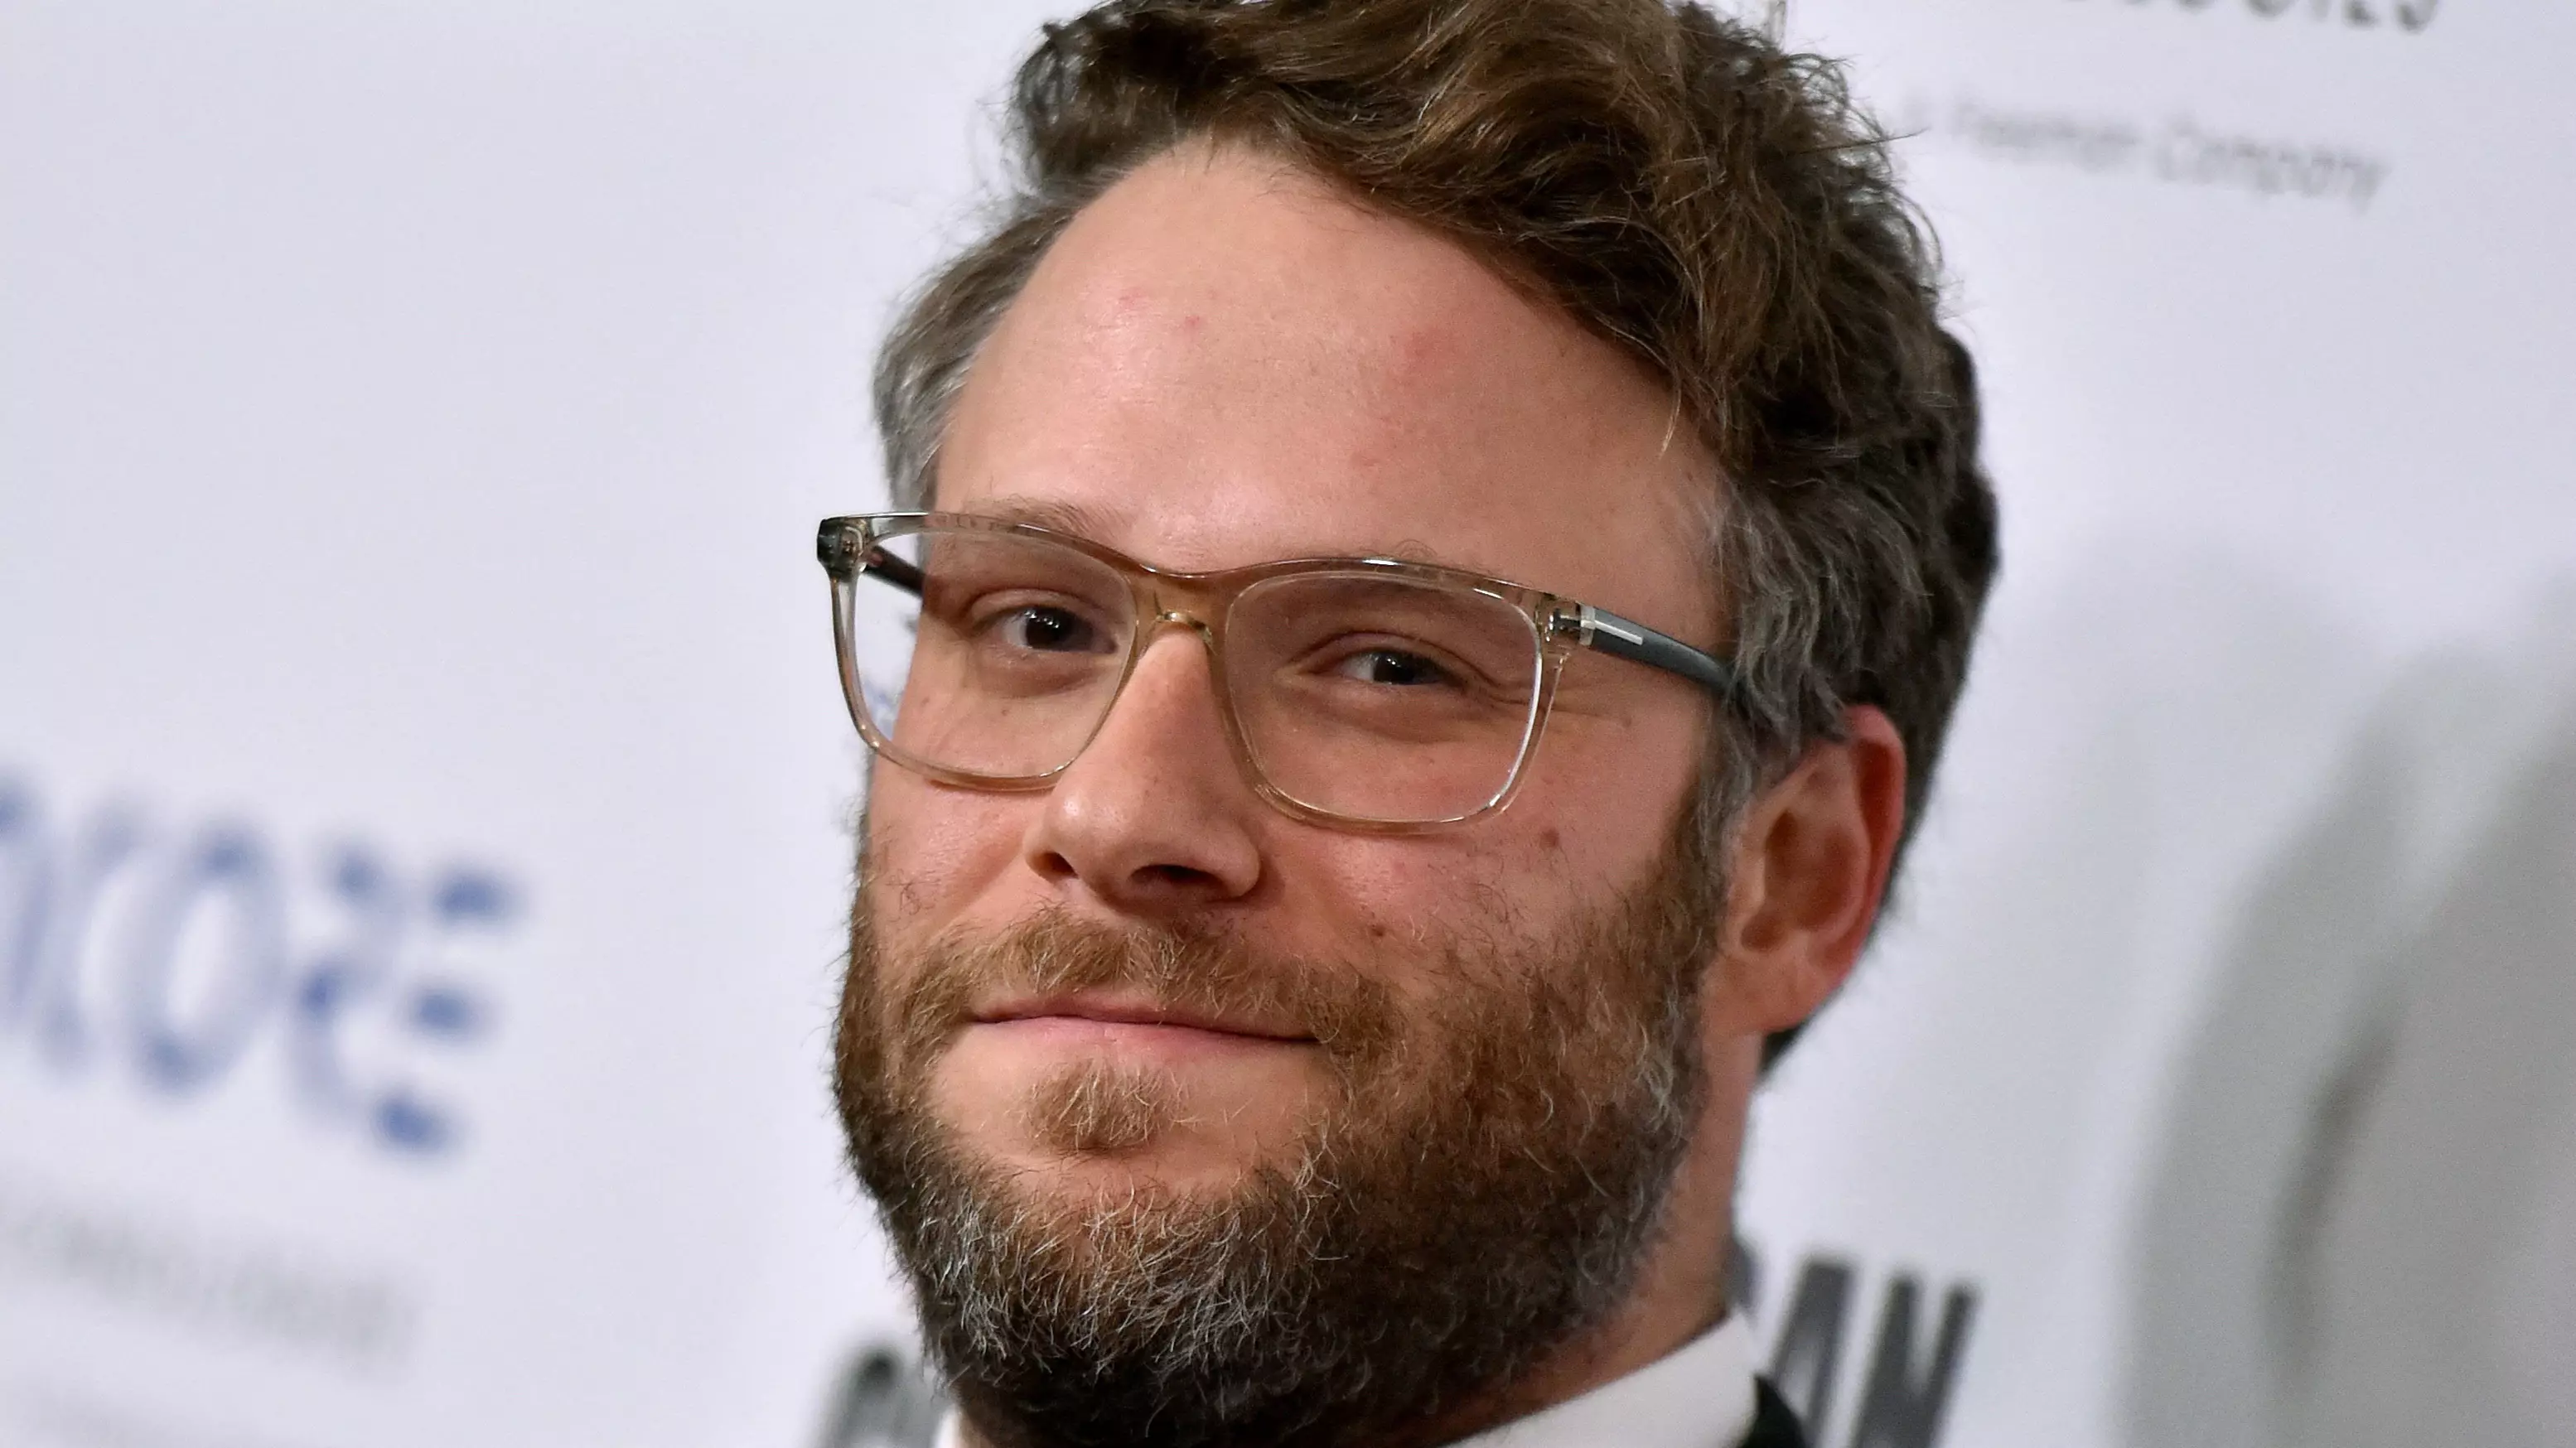 Seth Rogen Starts Every Morning With Cup Of Coffee And A Joint